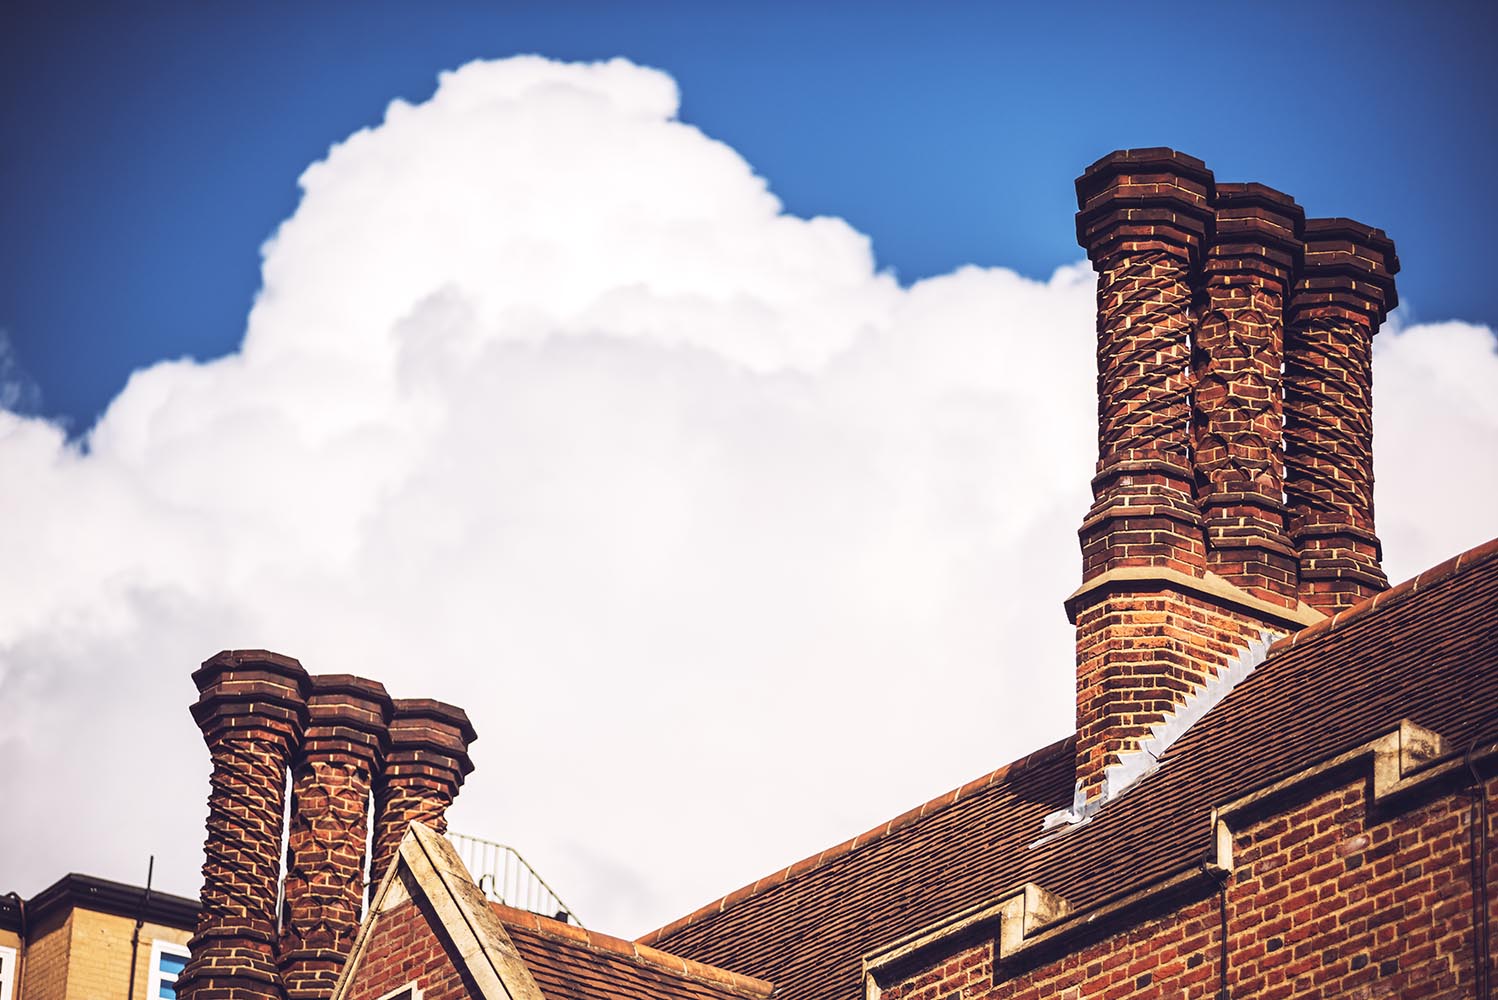 Brick chimney over clouds.